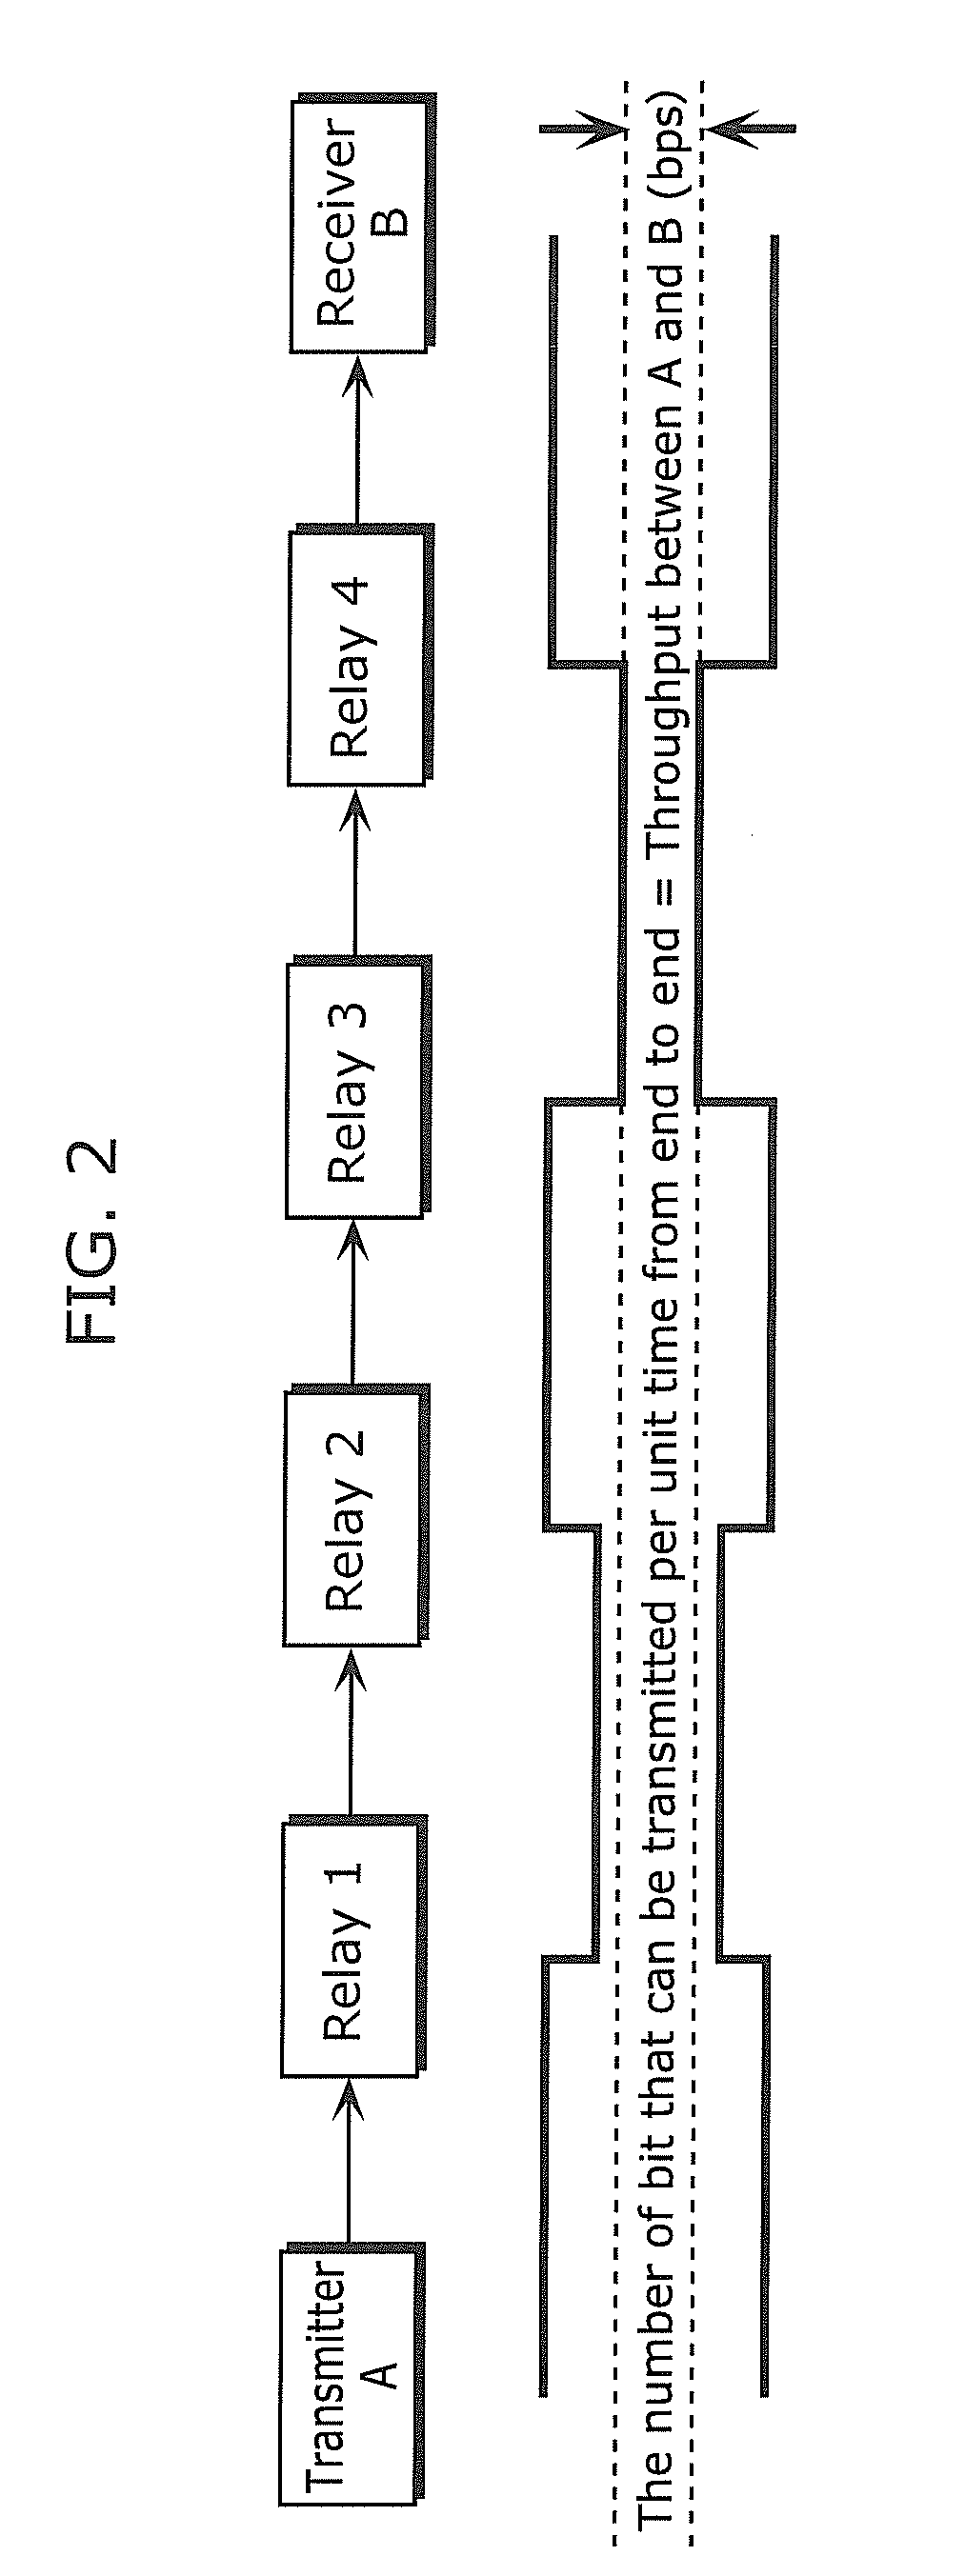 Network monitoring device, bus system monitoring device, method and program